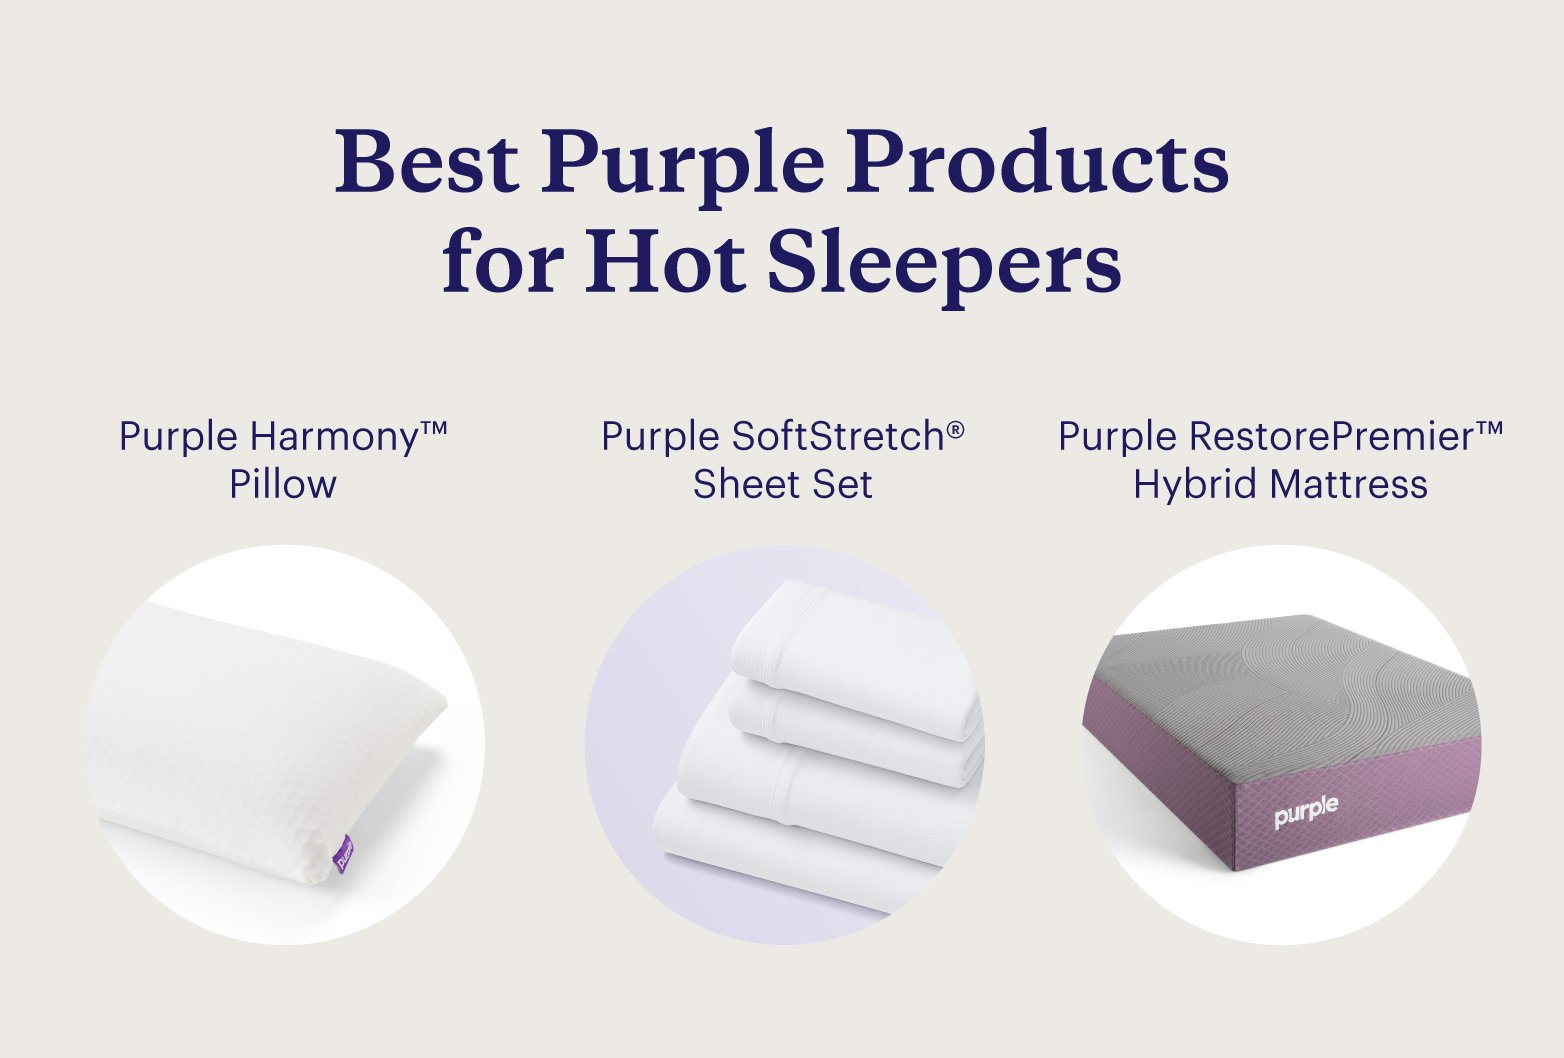 Three Purple products that are the best products for hot sleepers. 